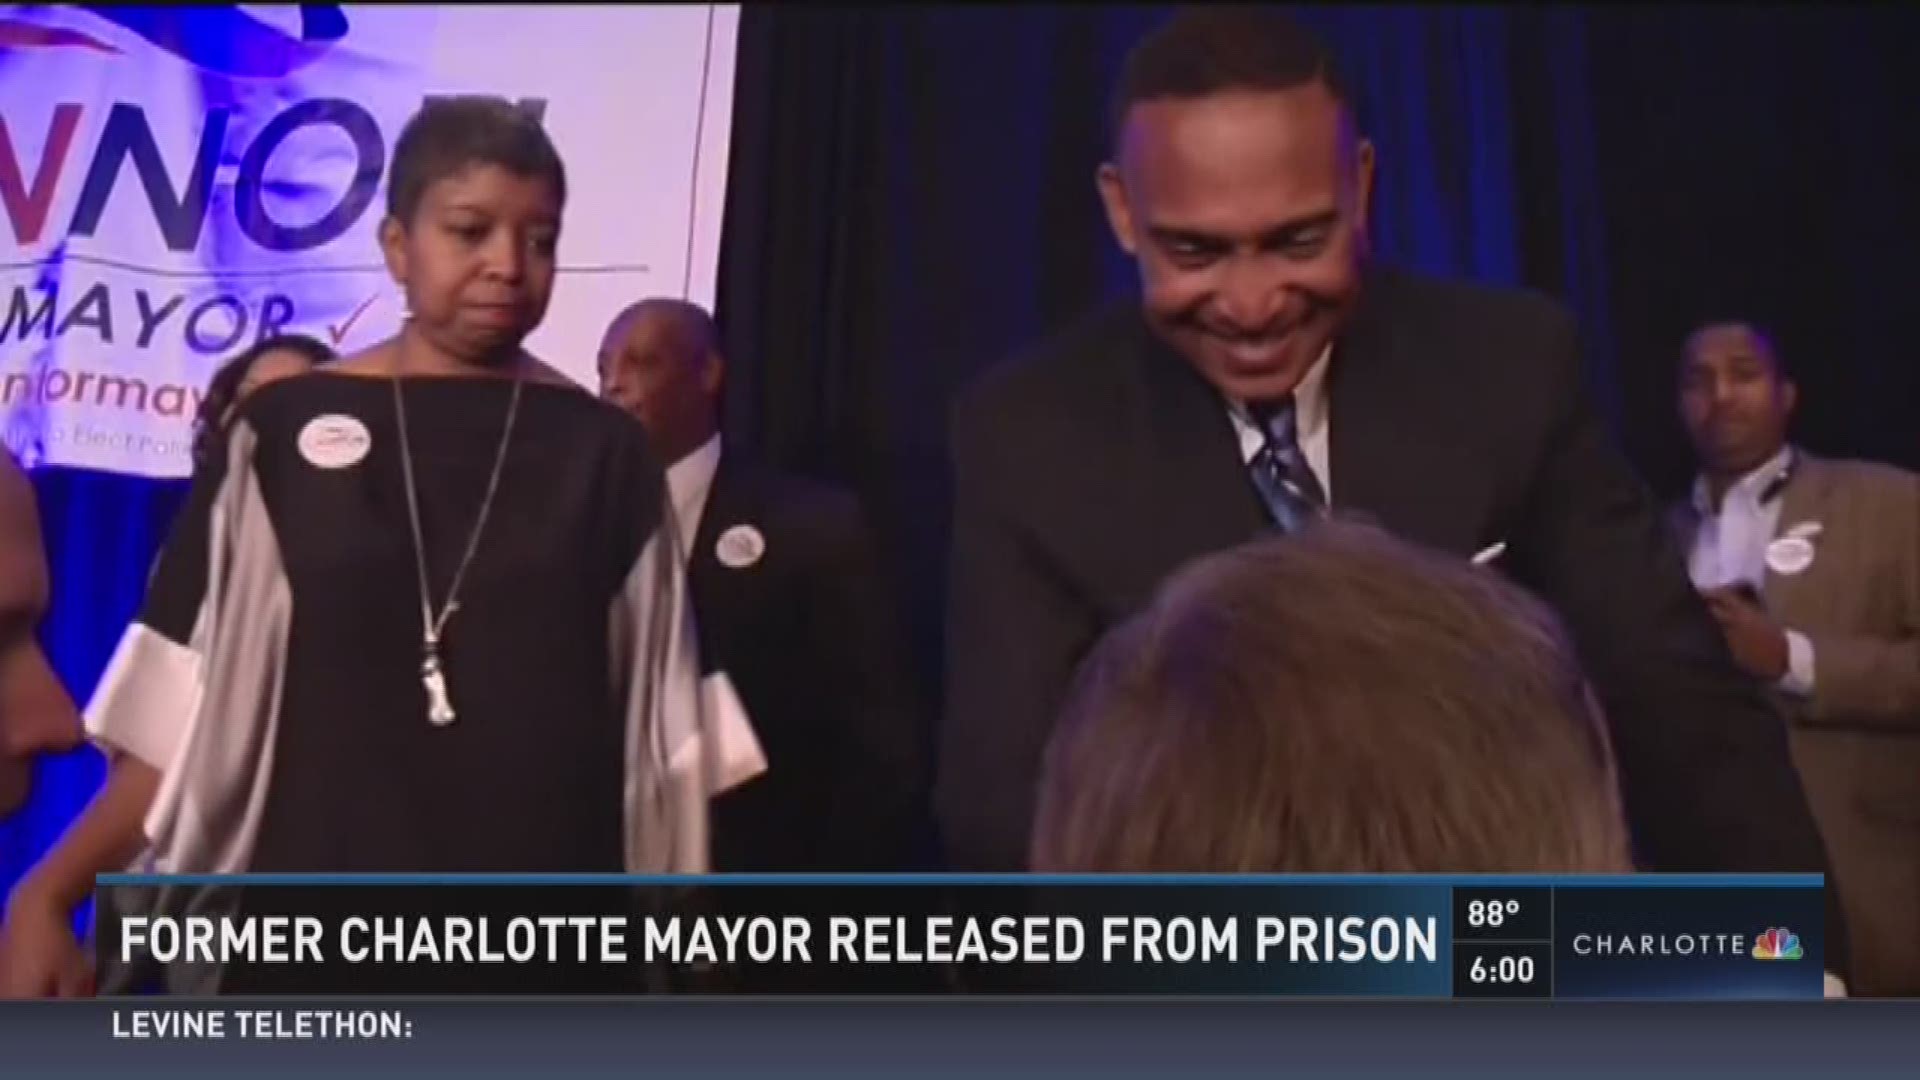 The former Charlotte mayor was released early, only serving half of his sentence but where is he?